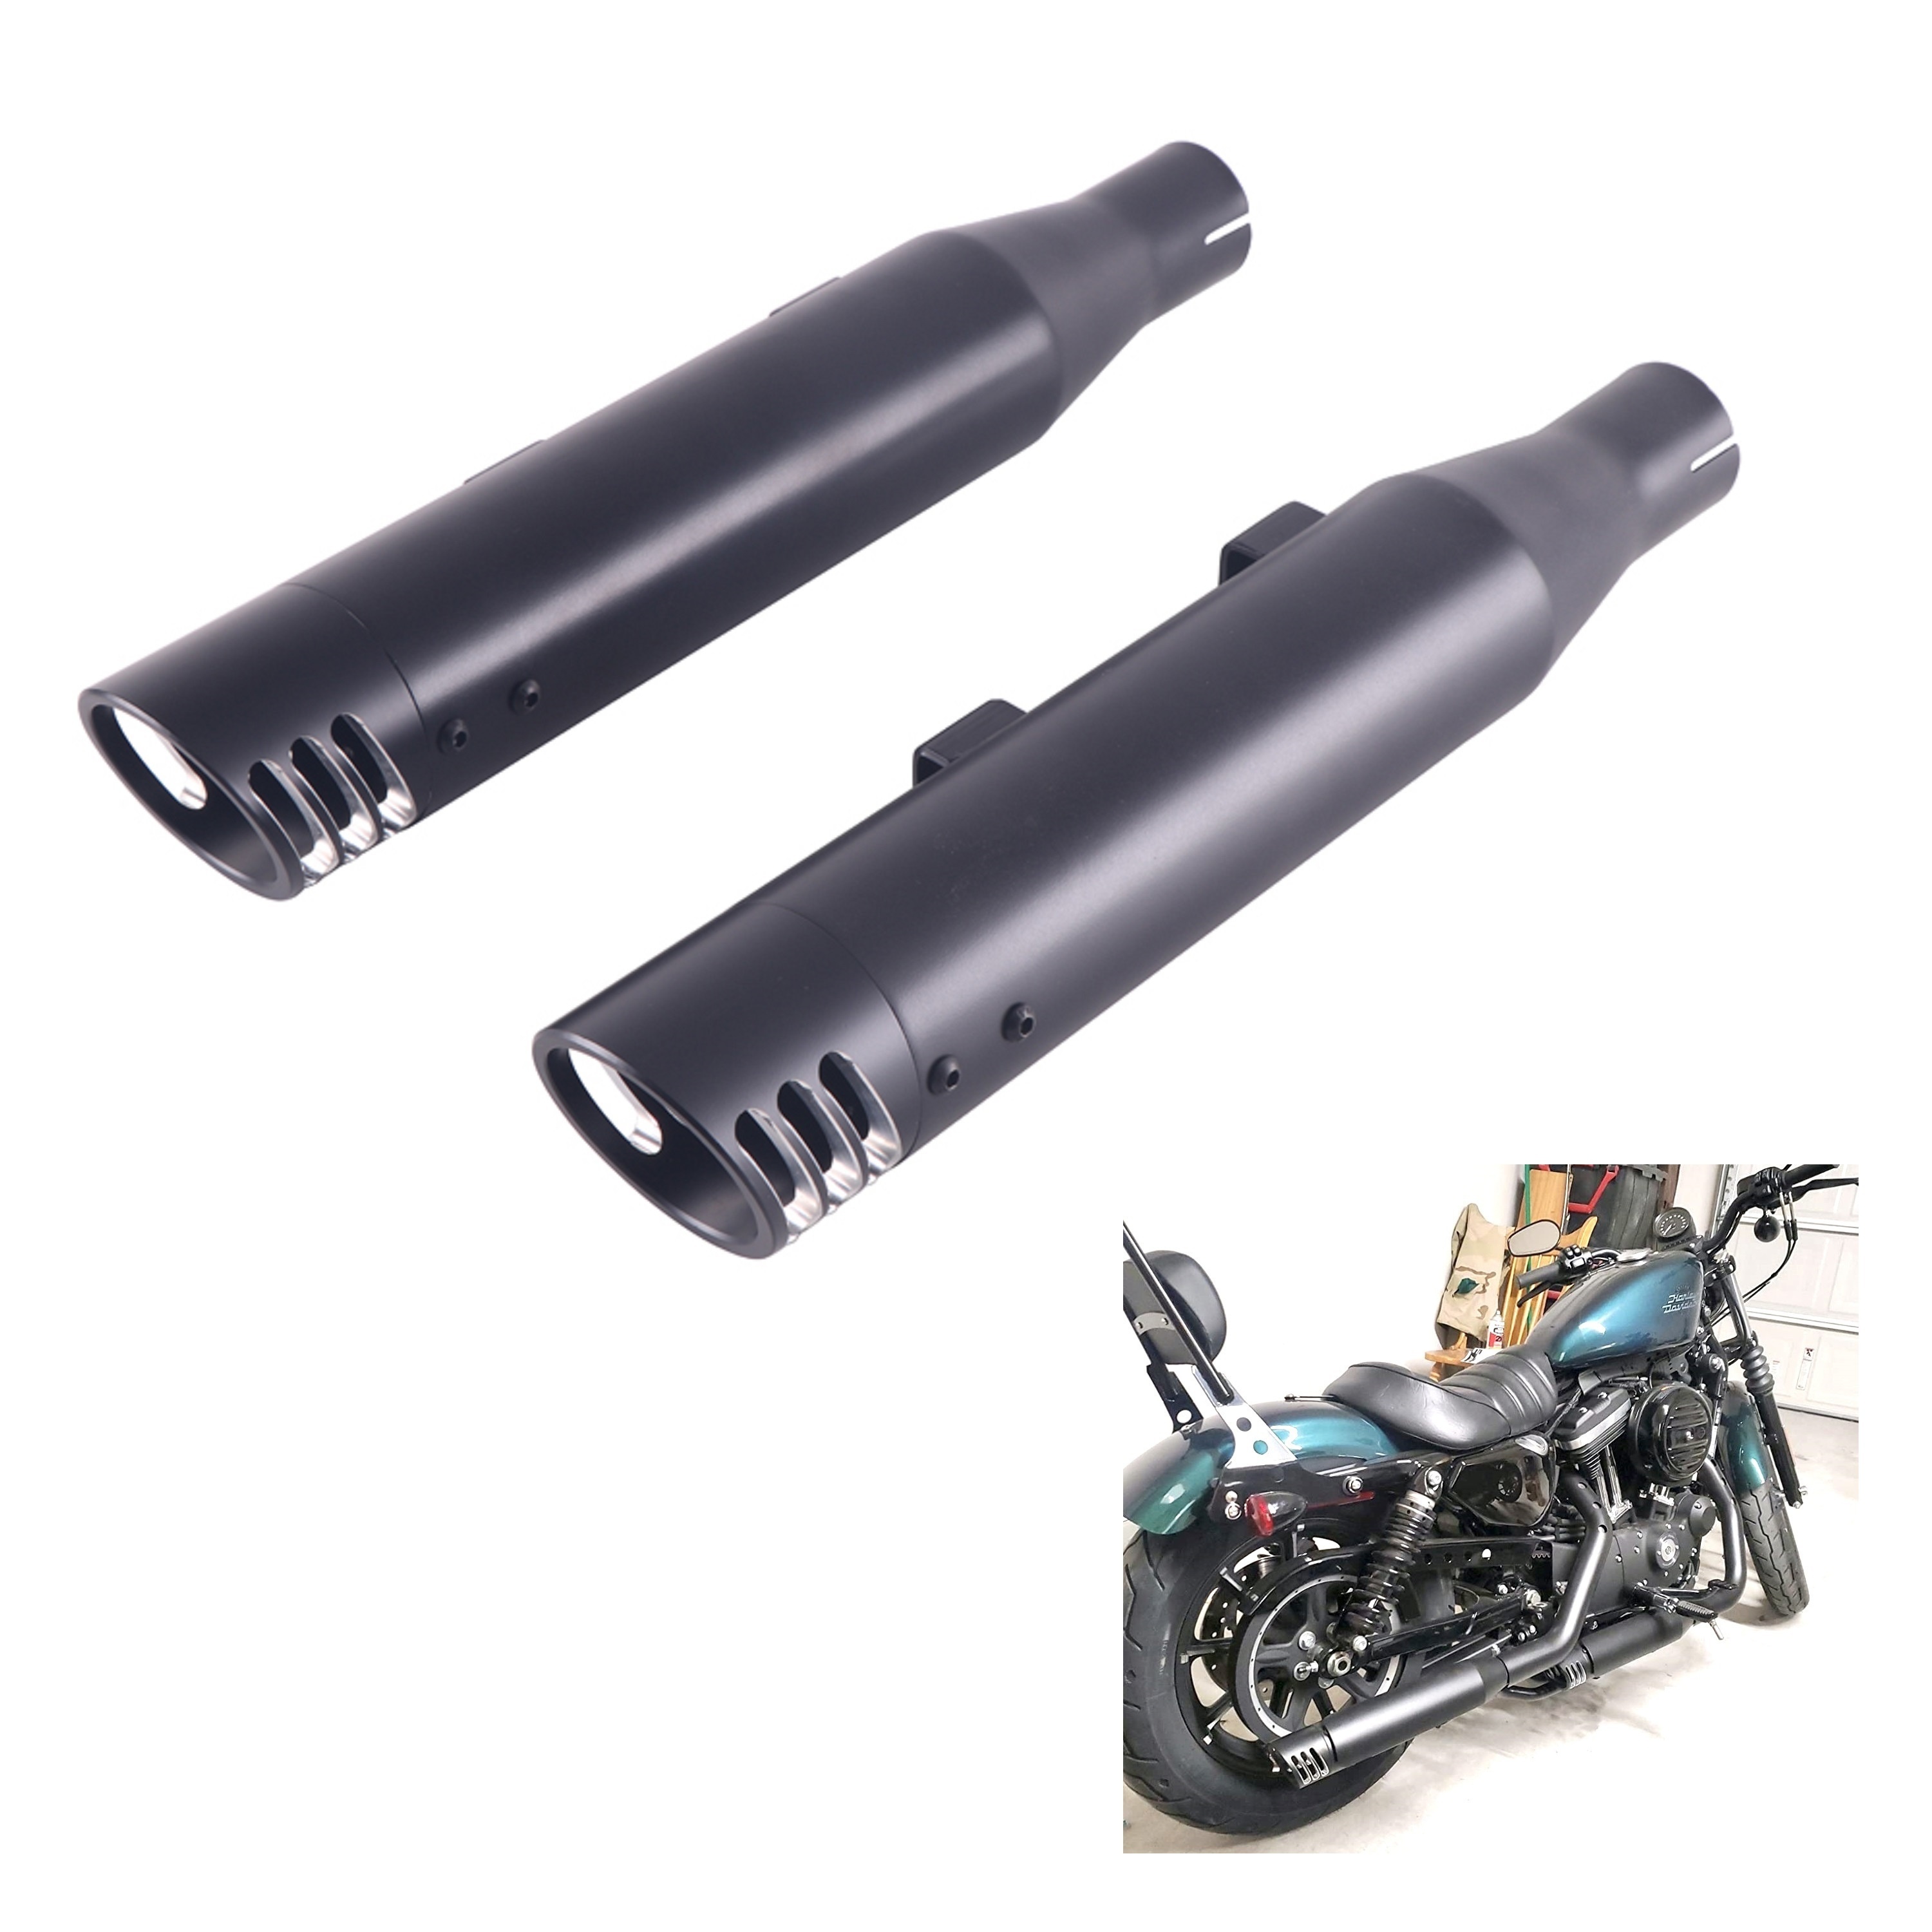 

3.0 Inch Exhaust Slip-on Pipes For Harley Sportster 2014-up, Quality Mufflers For Iron 883 Exhaust, Sportster 1200